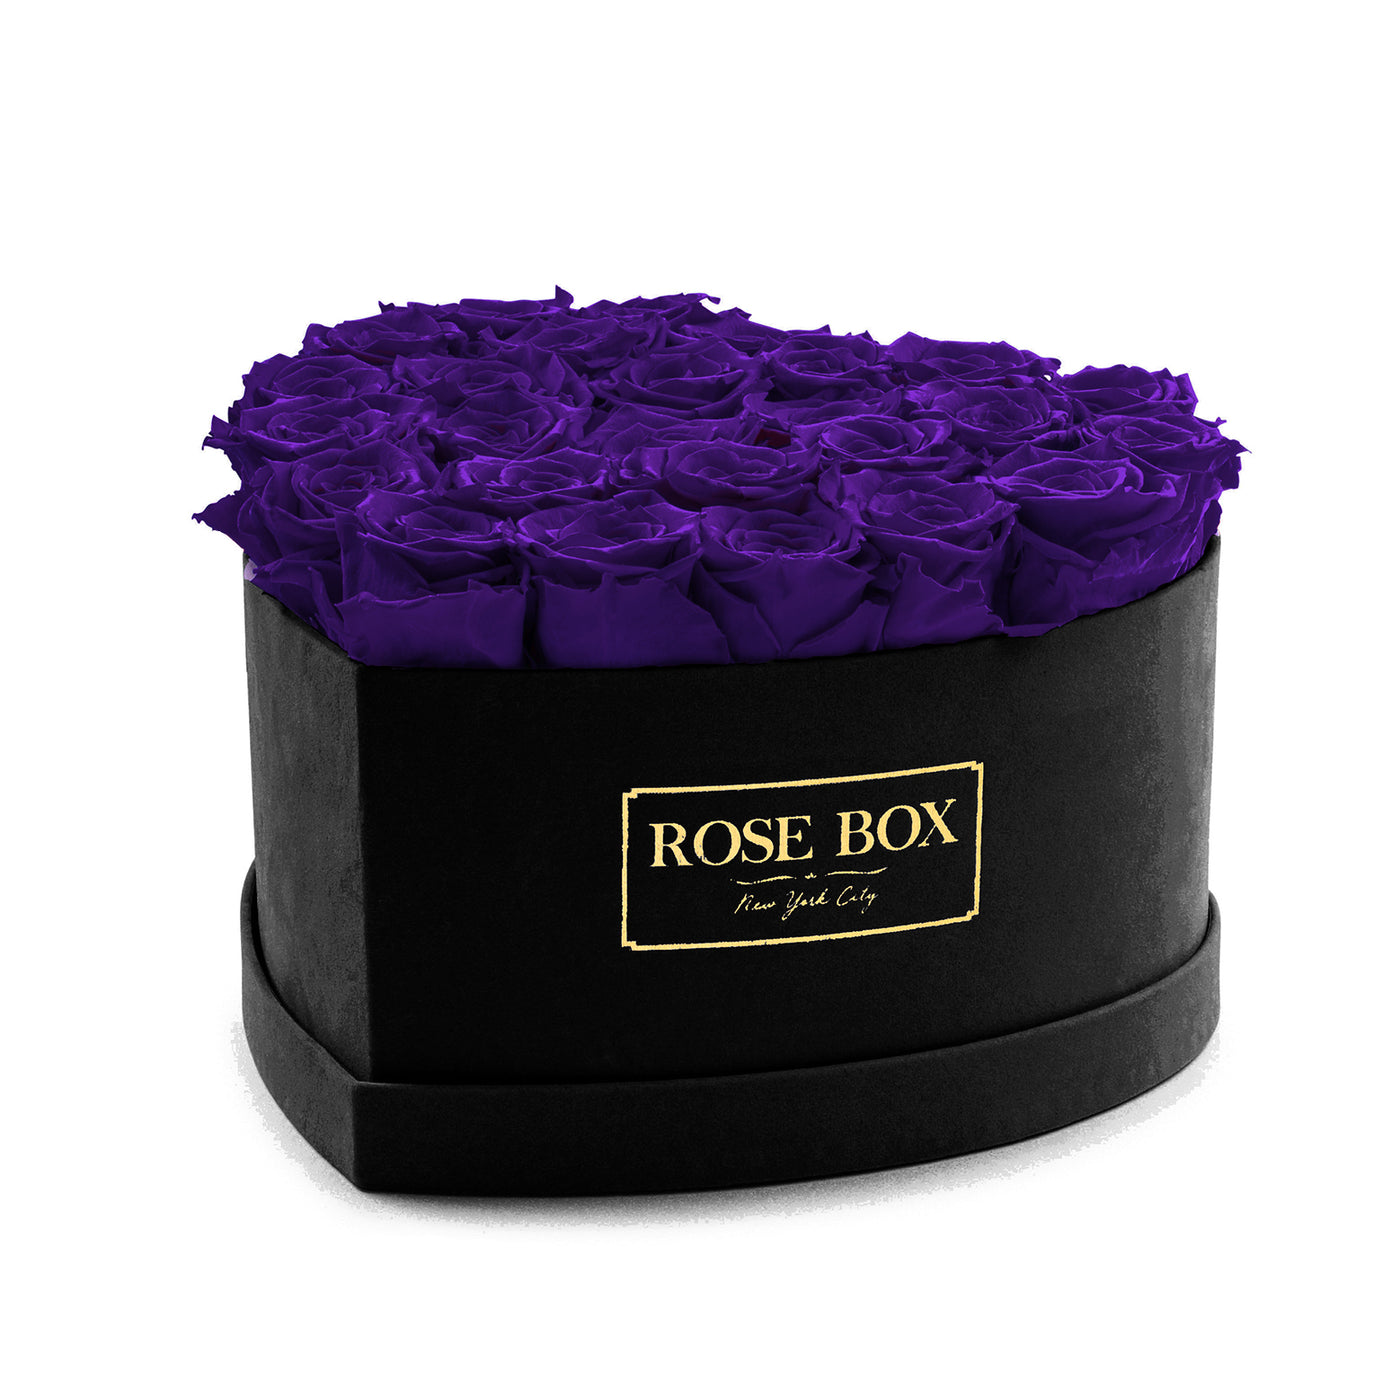 Large Black Heart Box with Blackberry Roses